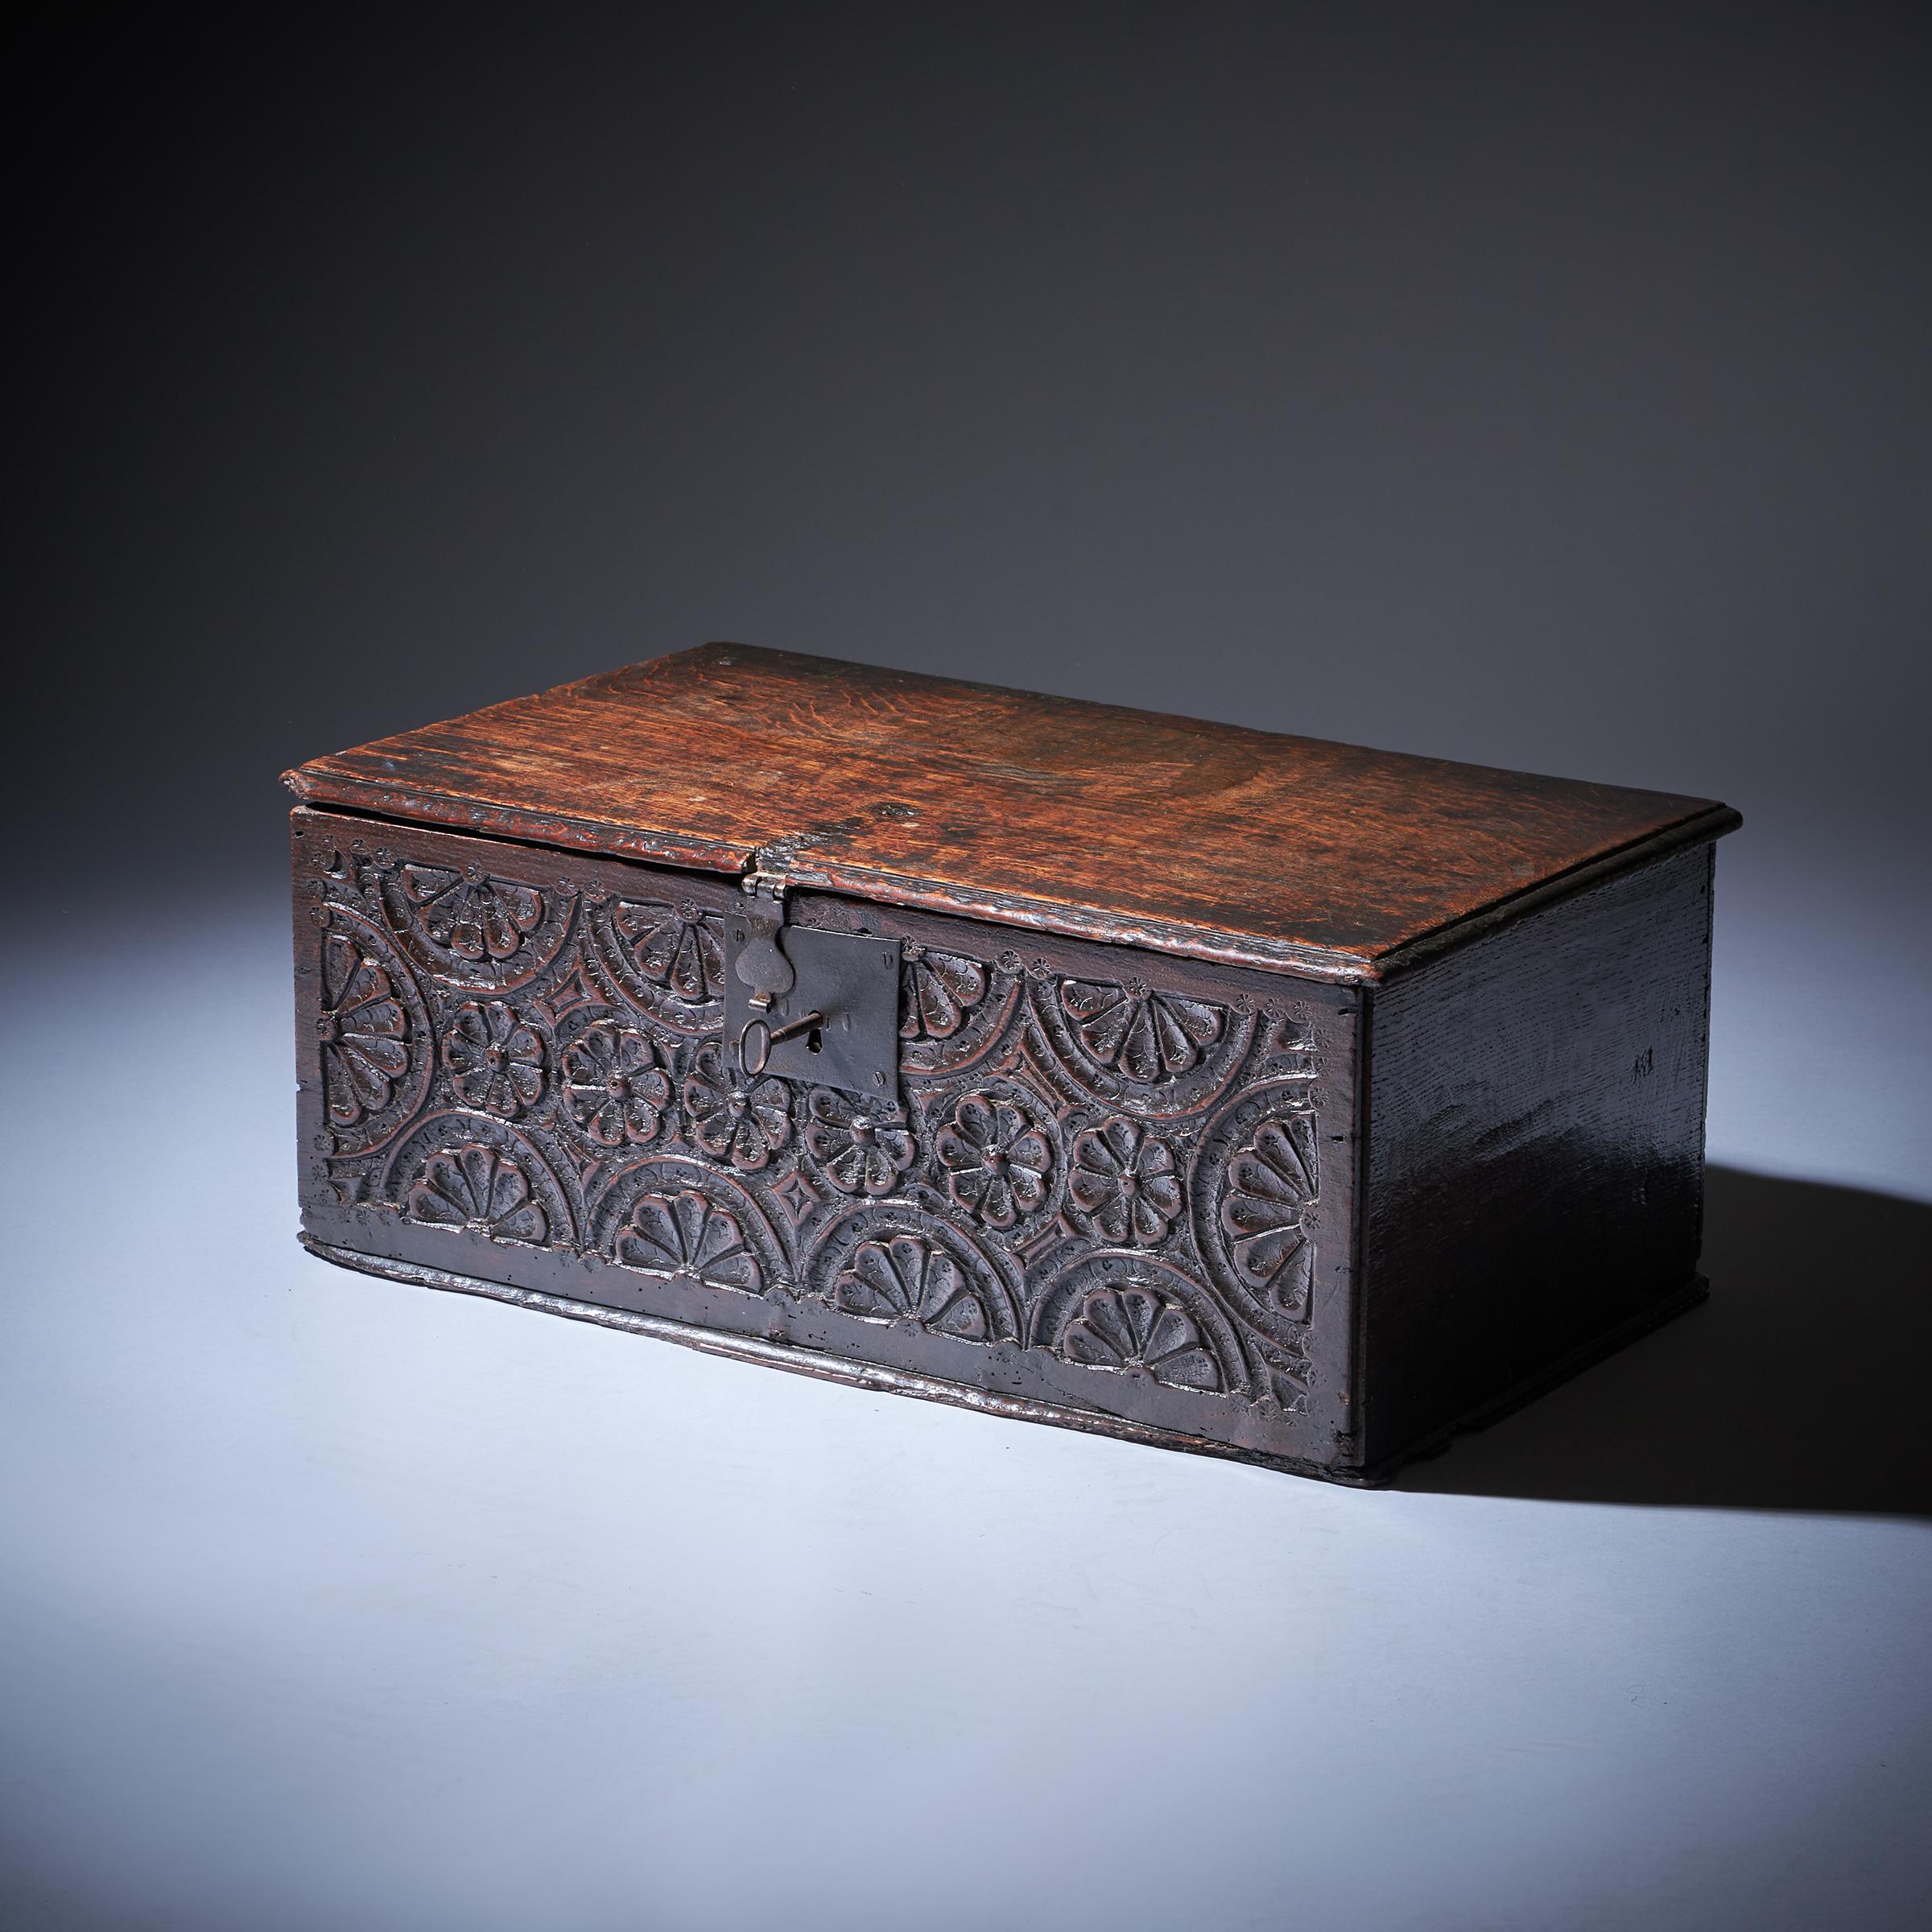 Jacobean 17th Century Charles I Carved Oak Box with Original Iron Clasp and Staple Lock For Sale